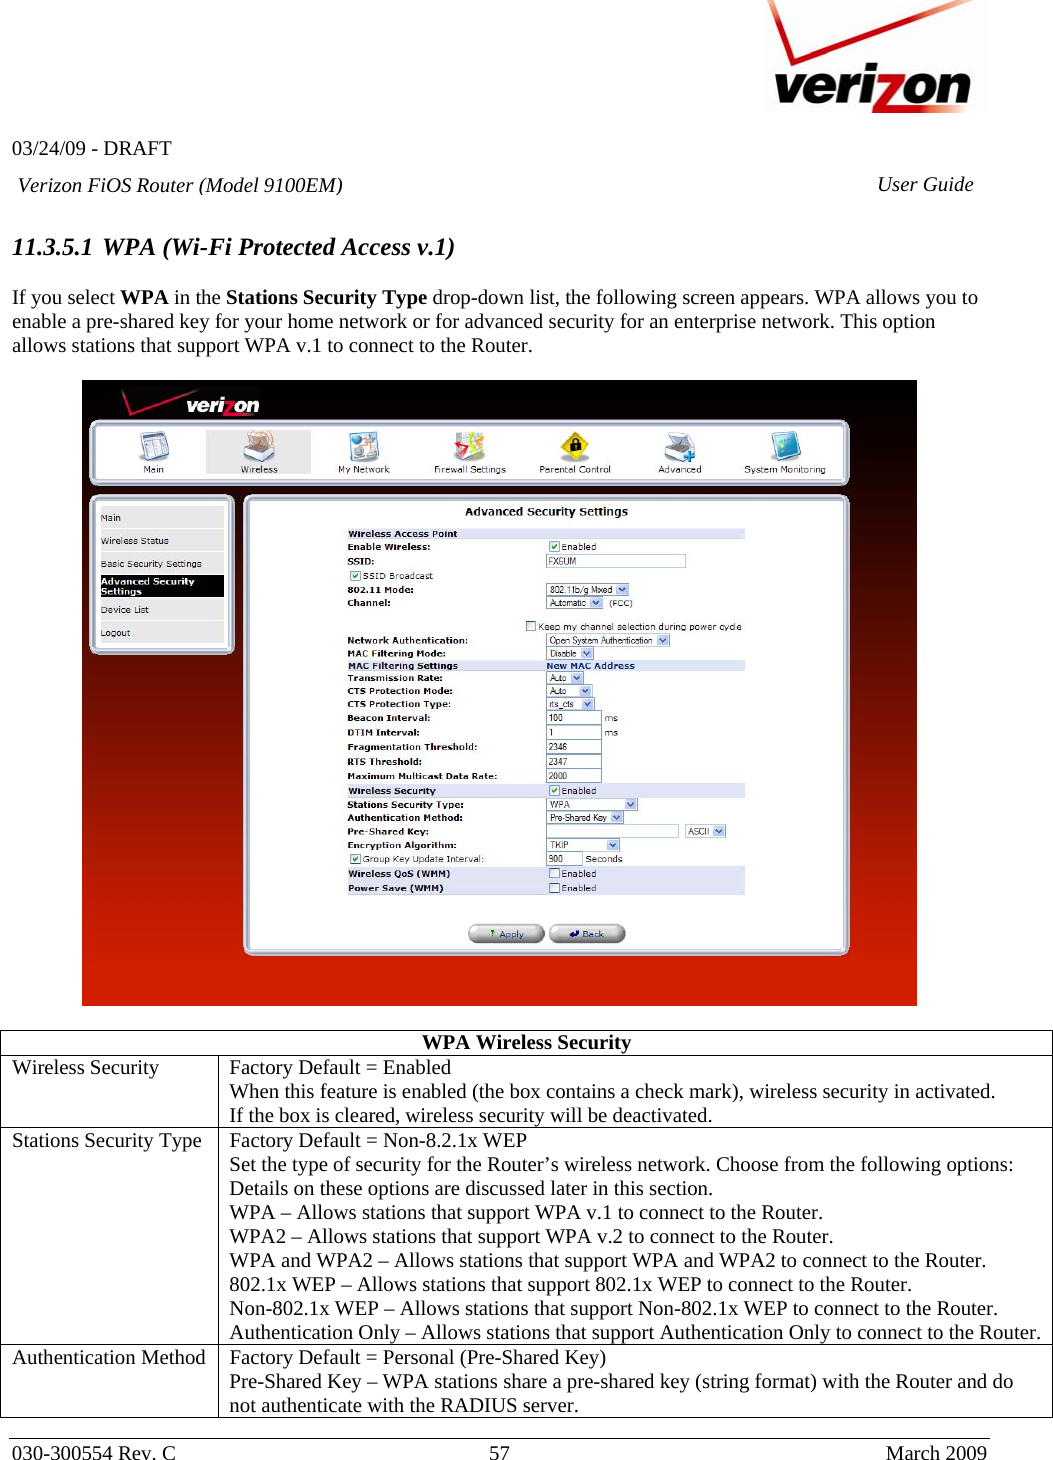   03/24/09 - DRAFT   030-300554 Rev. C  57      March 2009  Verizon FiOS Router (Model 9100EM) User Guide 11.3.5.1 WPA (Wi-Fi Protected Access v.1)  If you select WPA in the Stations Security Type drop-down list, the following screen appears. WPA allows you to enable a pre-shared key for your home network or for advanced security for an enterprise network. This option allows stations that support WPA v.1 to connect to the Router.    WPA Wireless Security Wireless Security  Factory Default = Enabled When this feature is enabled (the box contains a check mark), wireless security in activated. If the box is cleared, wireless security will be deactivated. Stations Security Type  Factory Default = Non-8.2.1x WEP Set the type of security for the Router’s wireless network. Choose from the following options: Details on these options are discussed later in this section. WPA – Allows stations that support WPA v.1 to connect to the Router. WPA2 – Allows stations that support WPA v.2 to connect to the Router. WPA and WPA2 – Allows stations that support WPA and WPA2 to connect to the Router. 802.1x WEP – Allows stations that support 802.1x WEP to connect to the Router. Non-802.1x WEP – Allows stations that support Non-802.1x WEP to connect to the Router. Authentication Only – Allows stations that support Authentication Only to connect to the Router. Authentication Method  Factory Default = Personal (Pre-Shared Key) Pre-Shared Key – WPA stations share a pre-shared key (string format) with the Router and do not authenticate with the RADIUS server. 